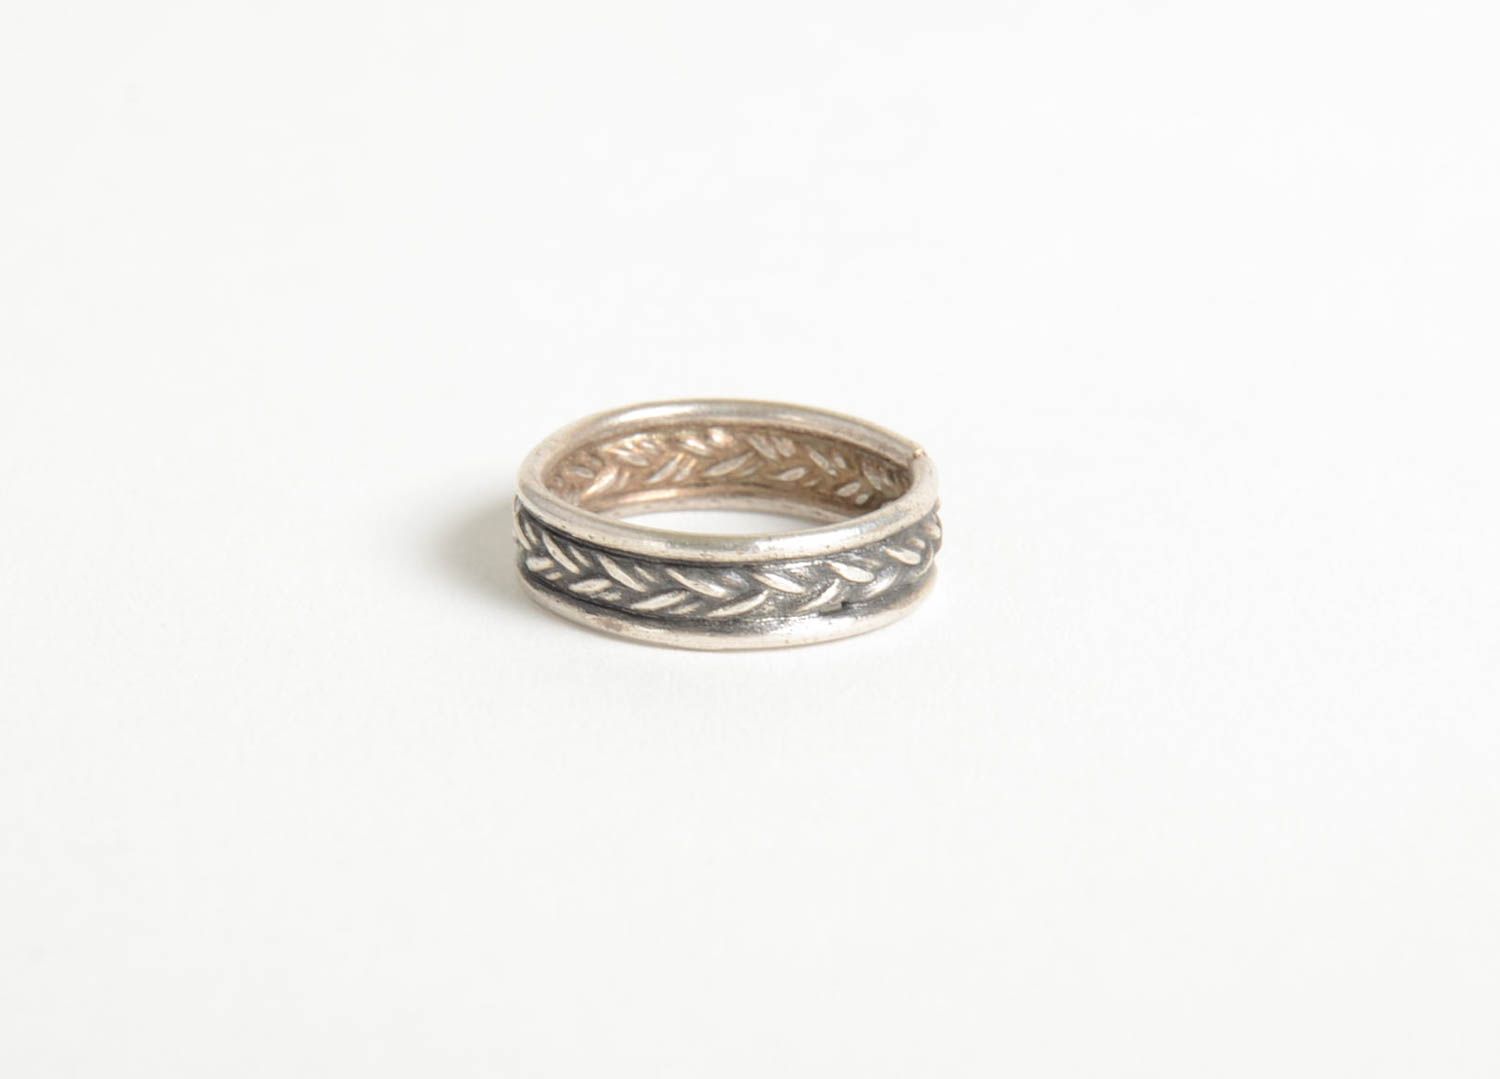 Unusual handmade metal ring seal ring design fashion trends gifts for her photo 4